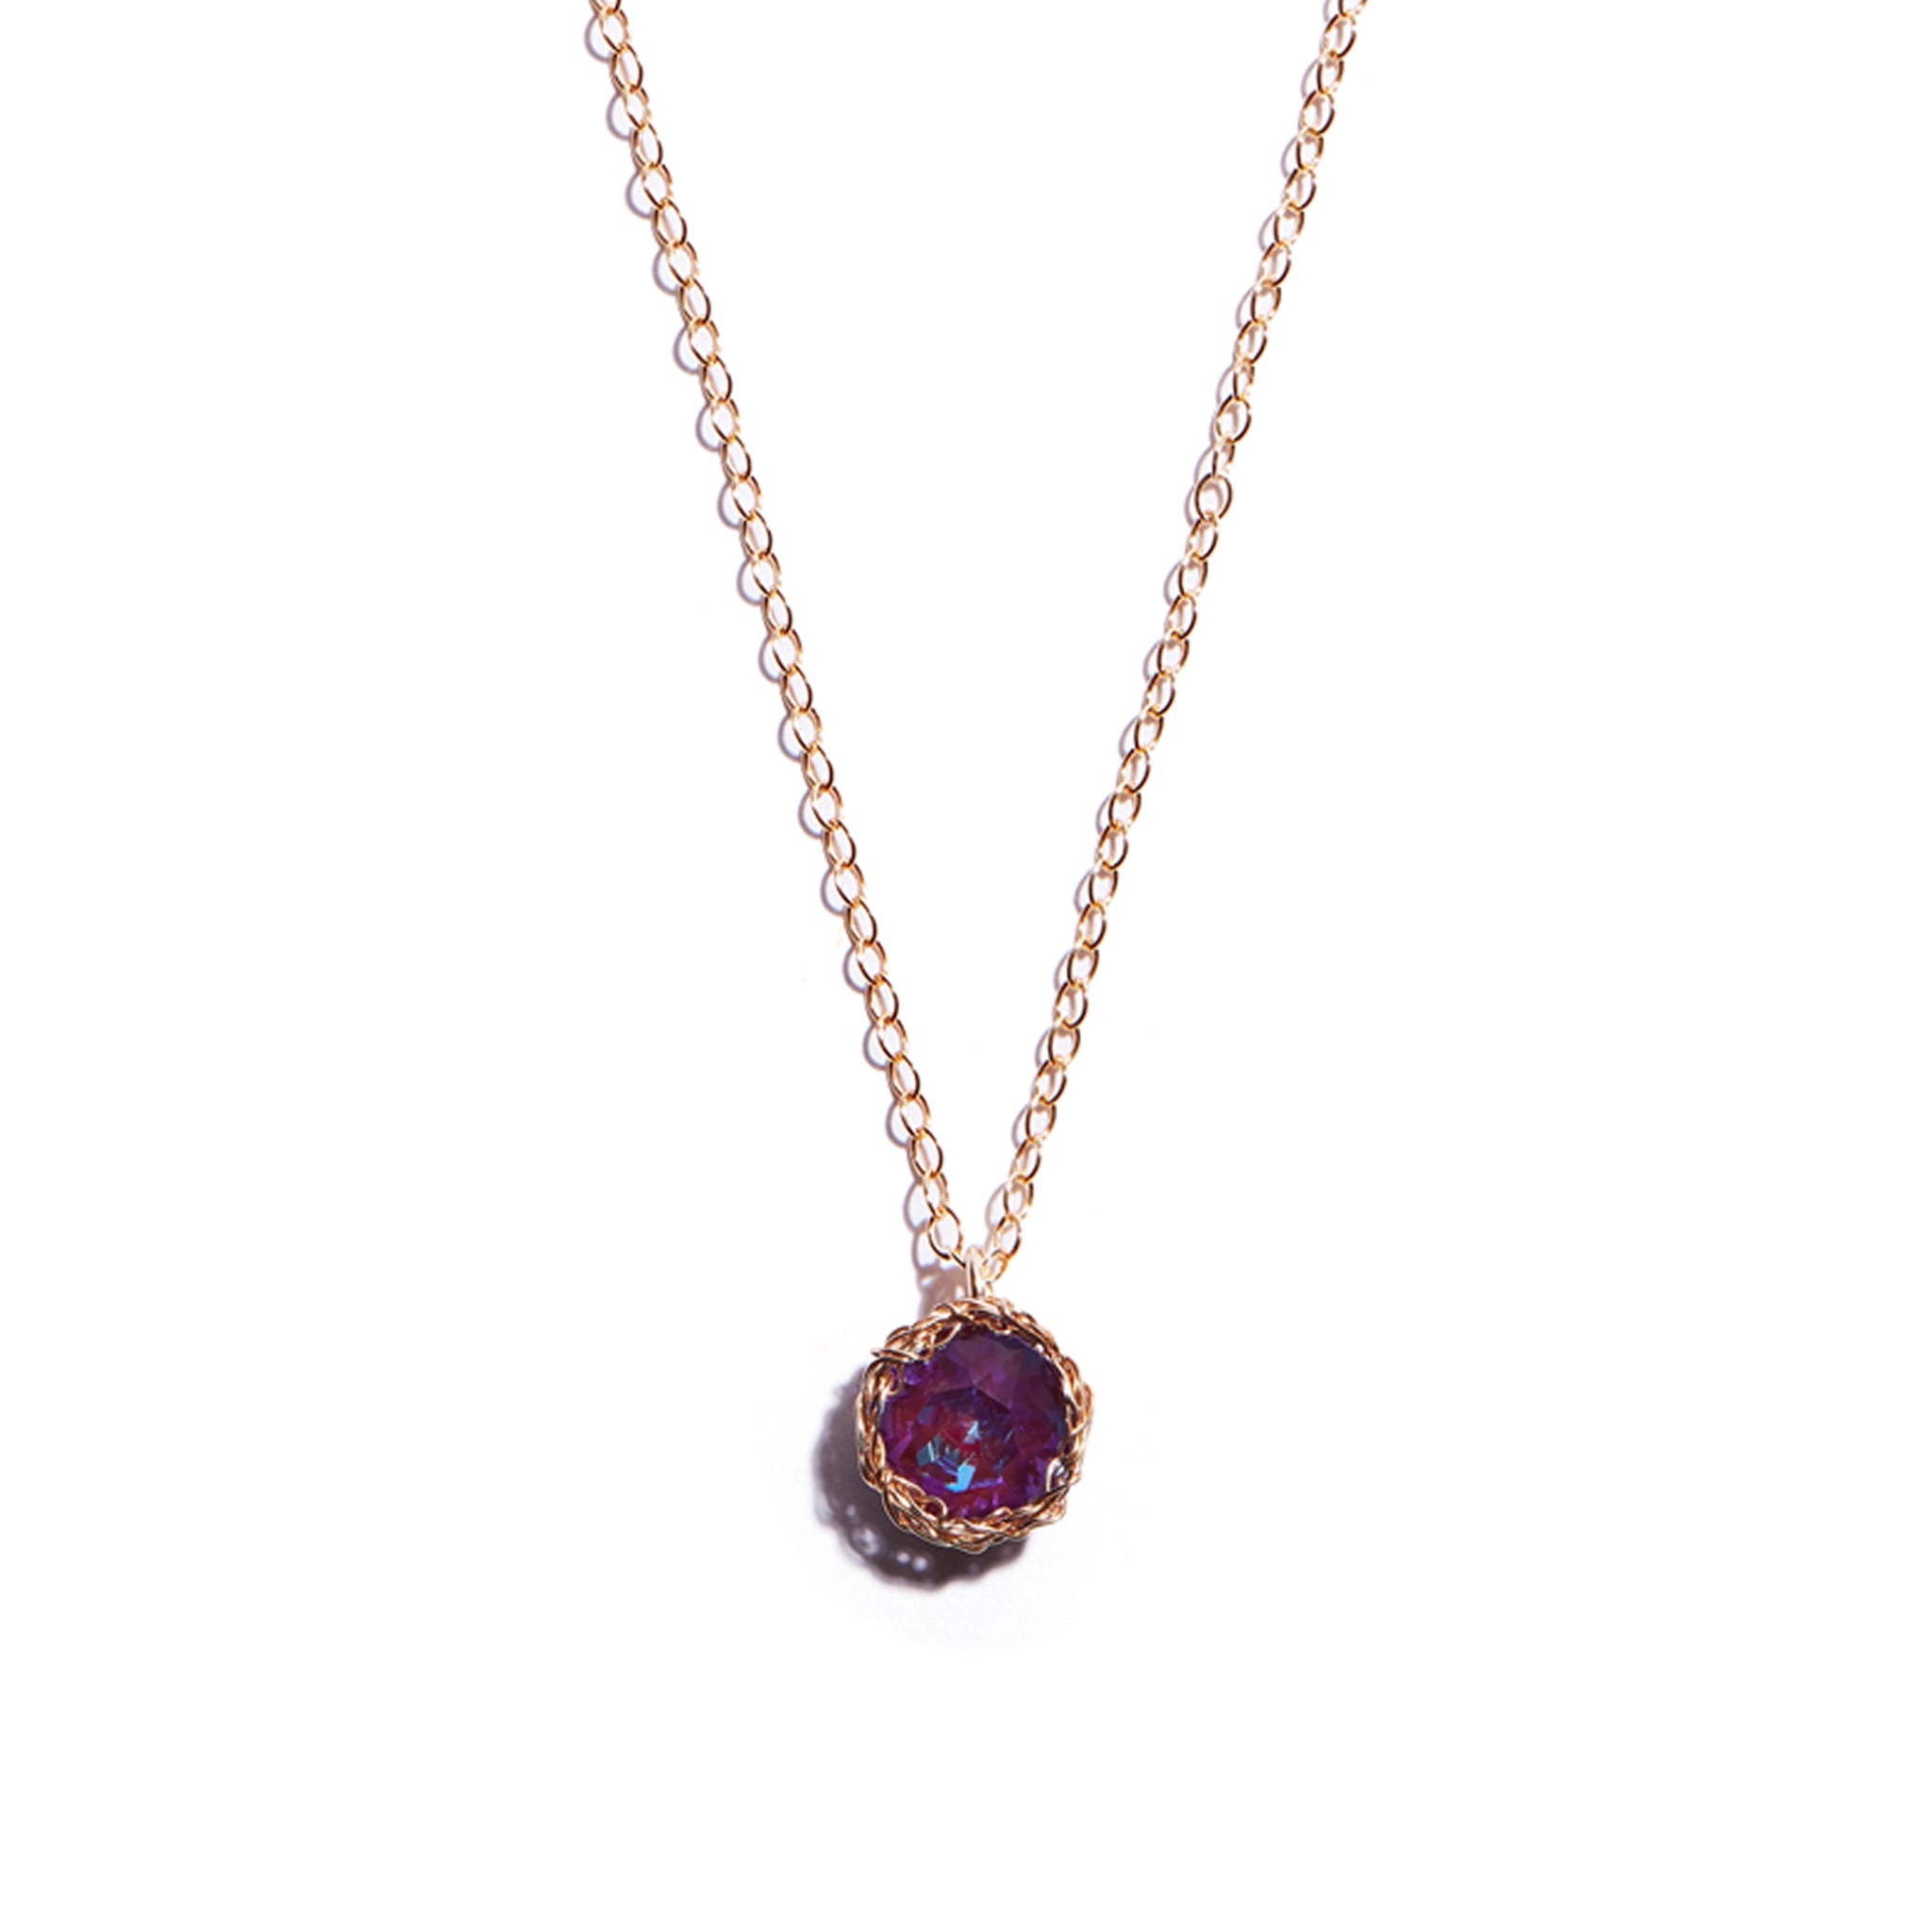 Close-up photo of a crochet necklace featuring a January birthstone pendant made or garnet, set in 14 ct gold-filled  metal.